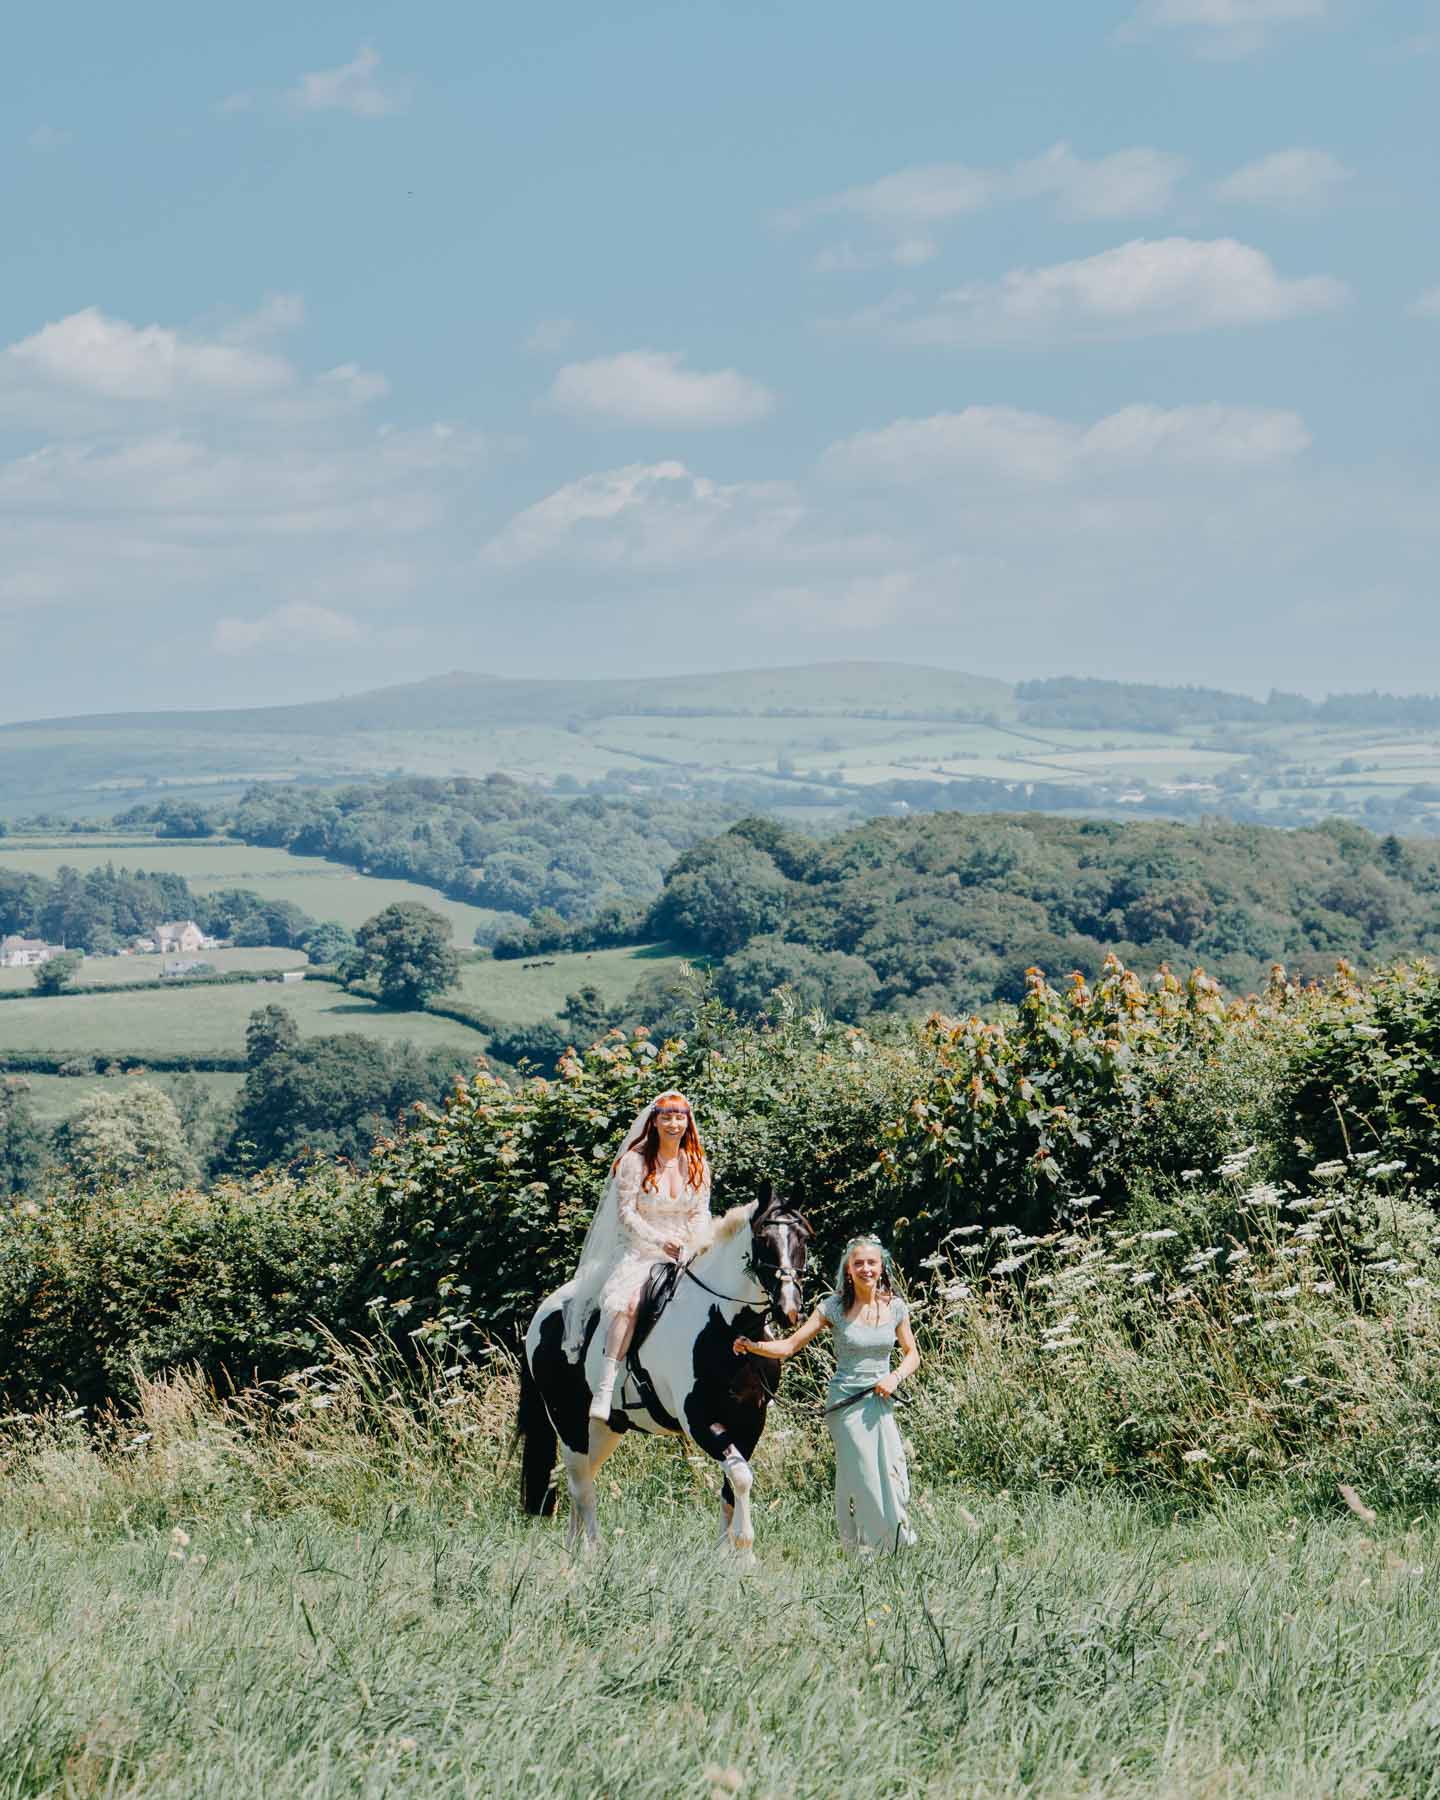 the bride is riding a horse to the handfasting ceremony